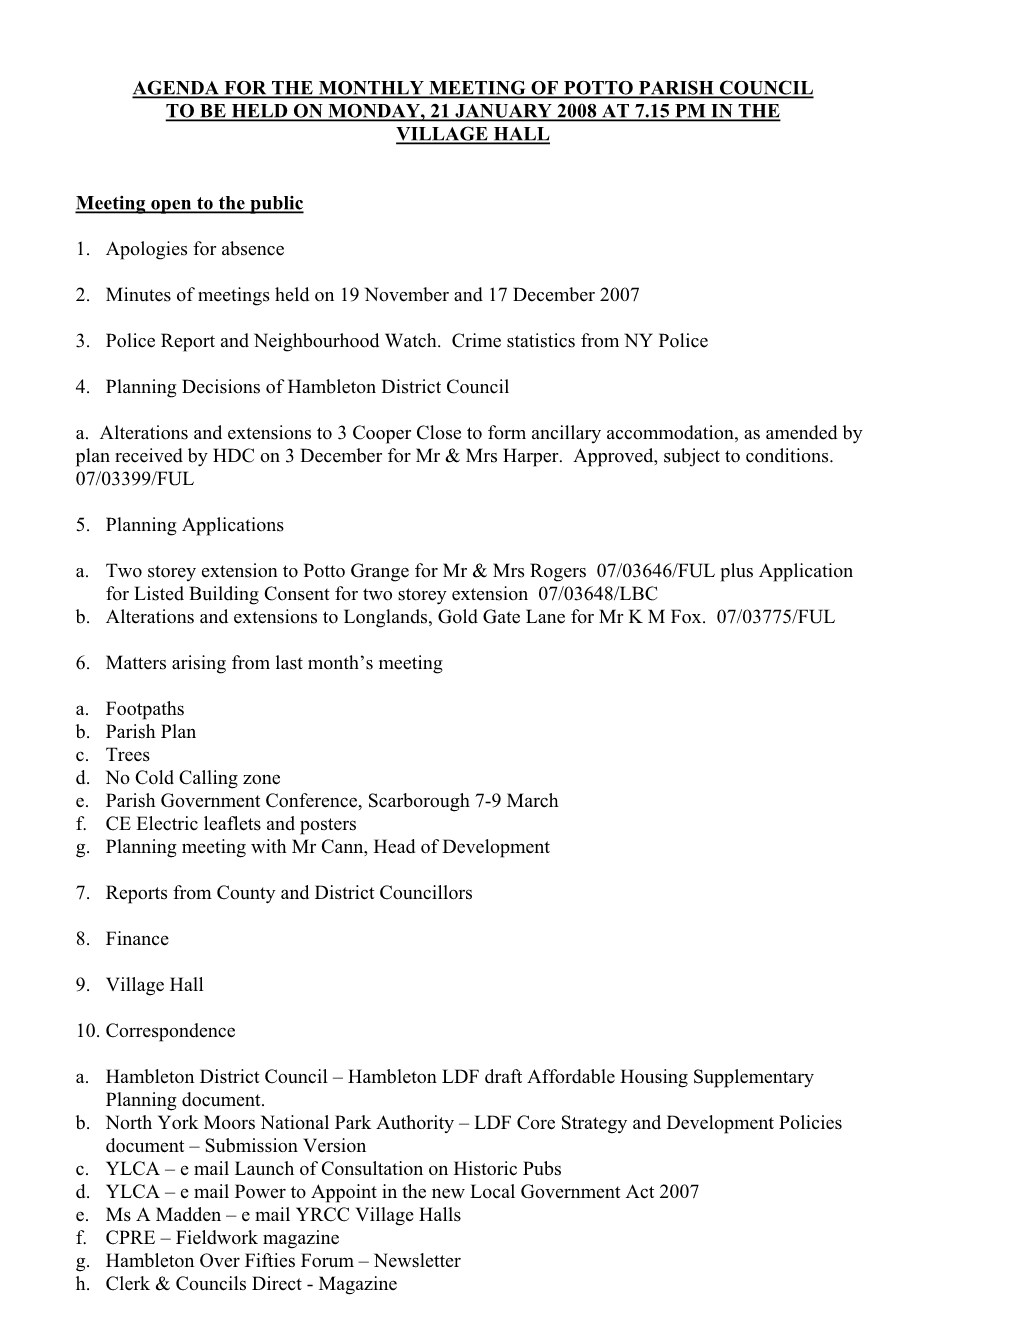 Agenda for the Monthly Meeting of Potto Parish Council to Be Held on Monday, 21 January 2008 at 7.15 Pm in the Village Hall